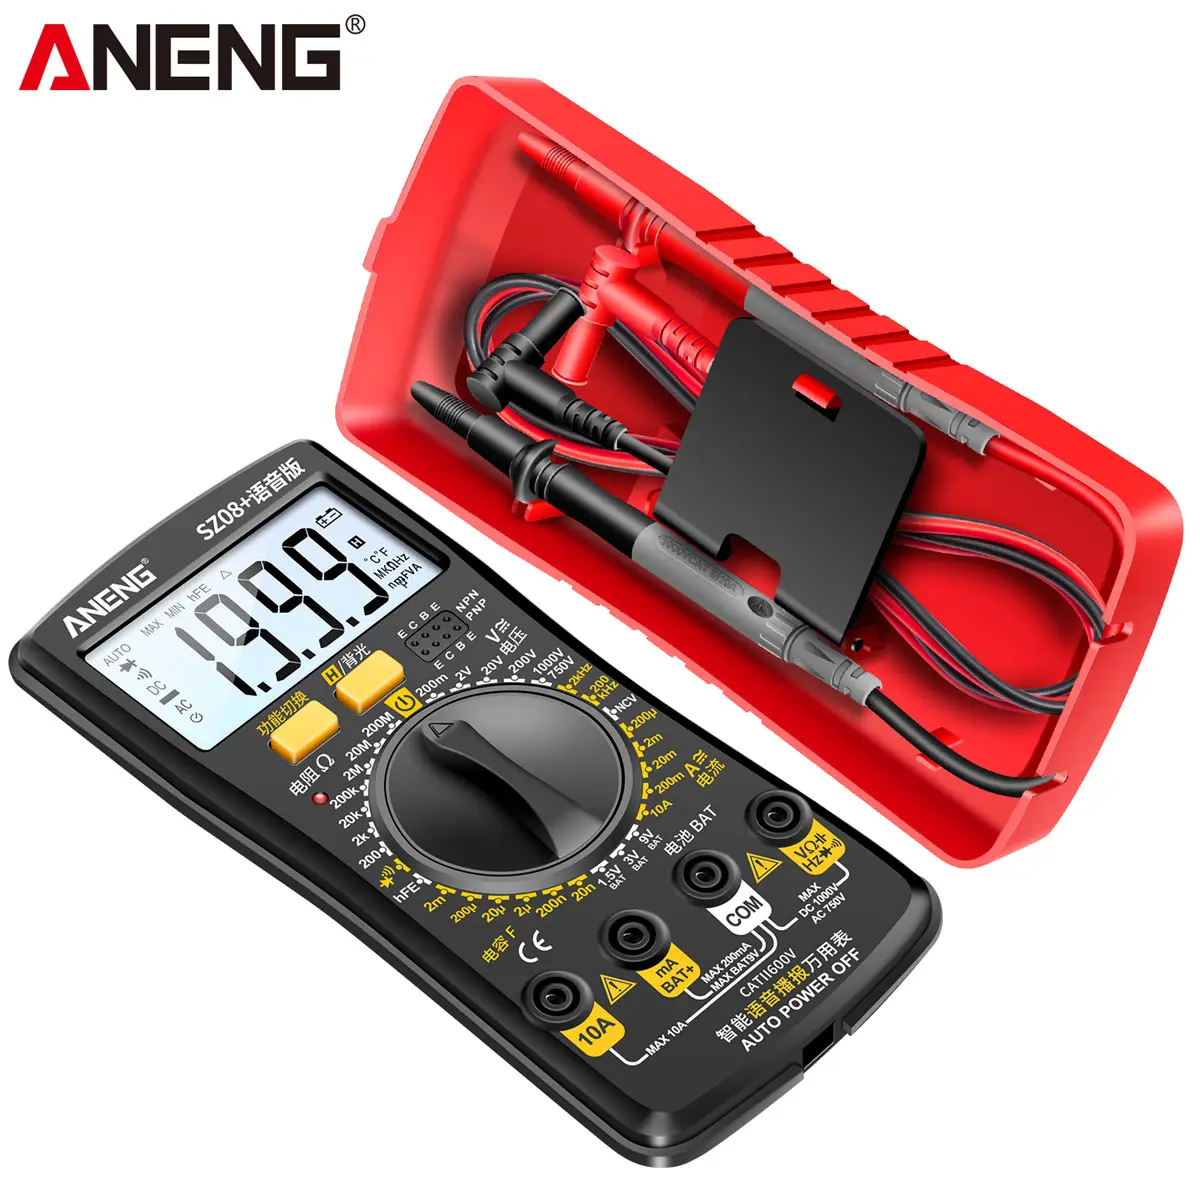 ANENG SZ08+ Voice Broadcast Multimeter Ultra-thin Storage Large Screen Digital Professional Meter Tester Tool With Test Lead